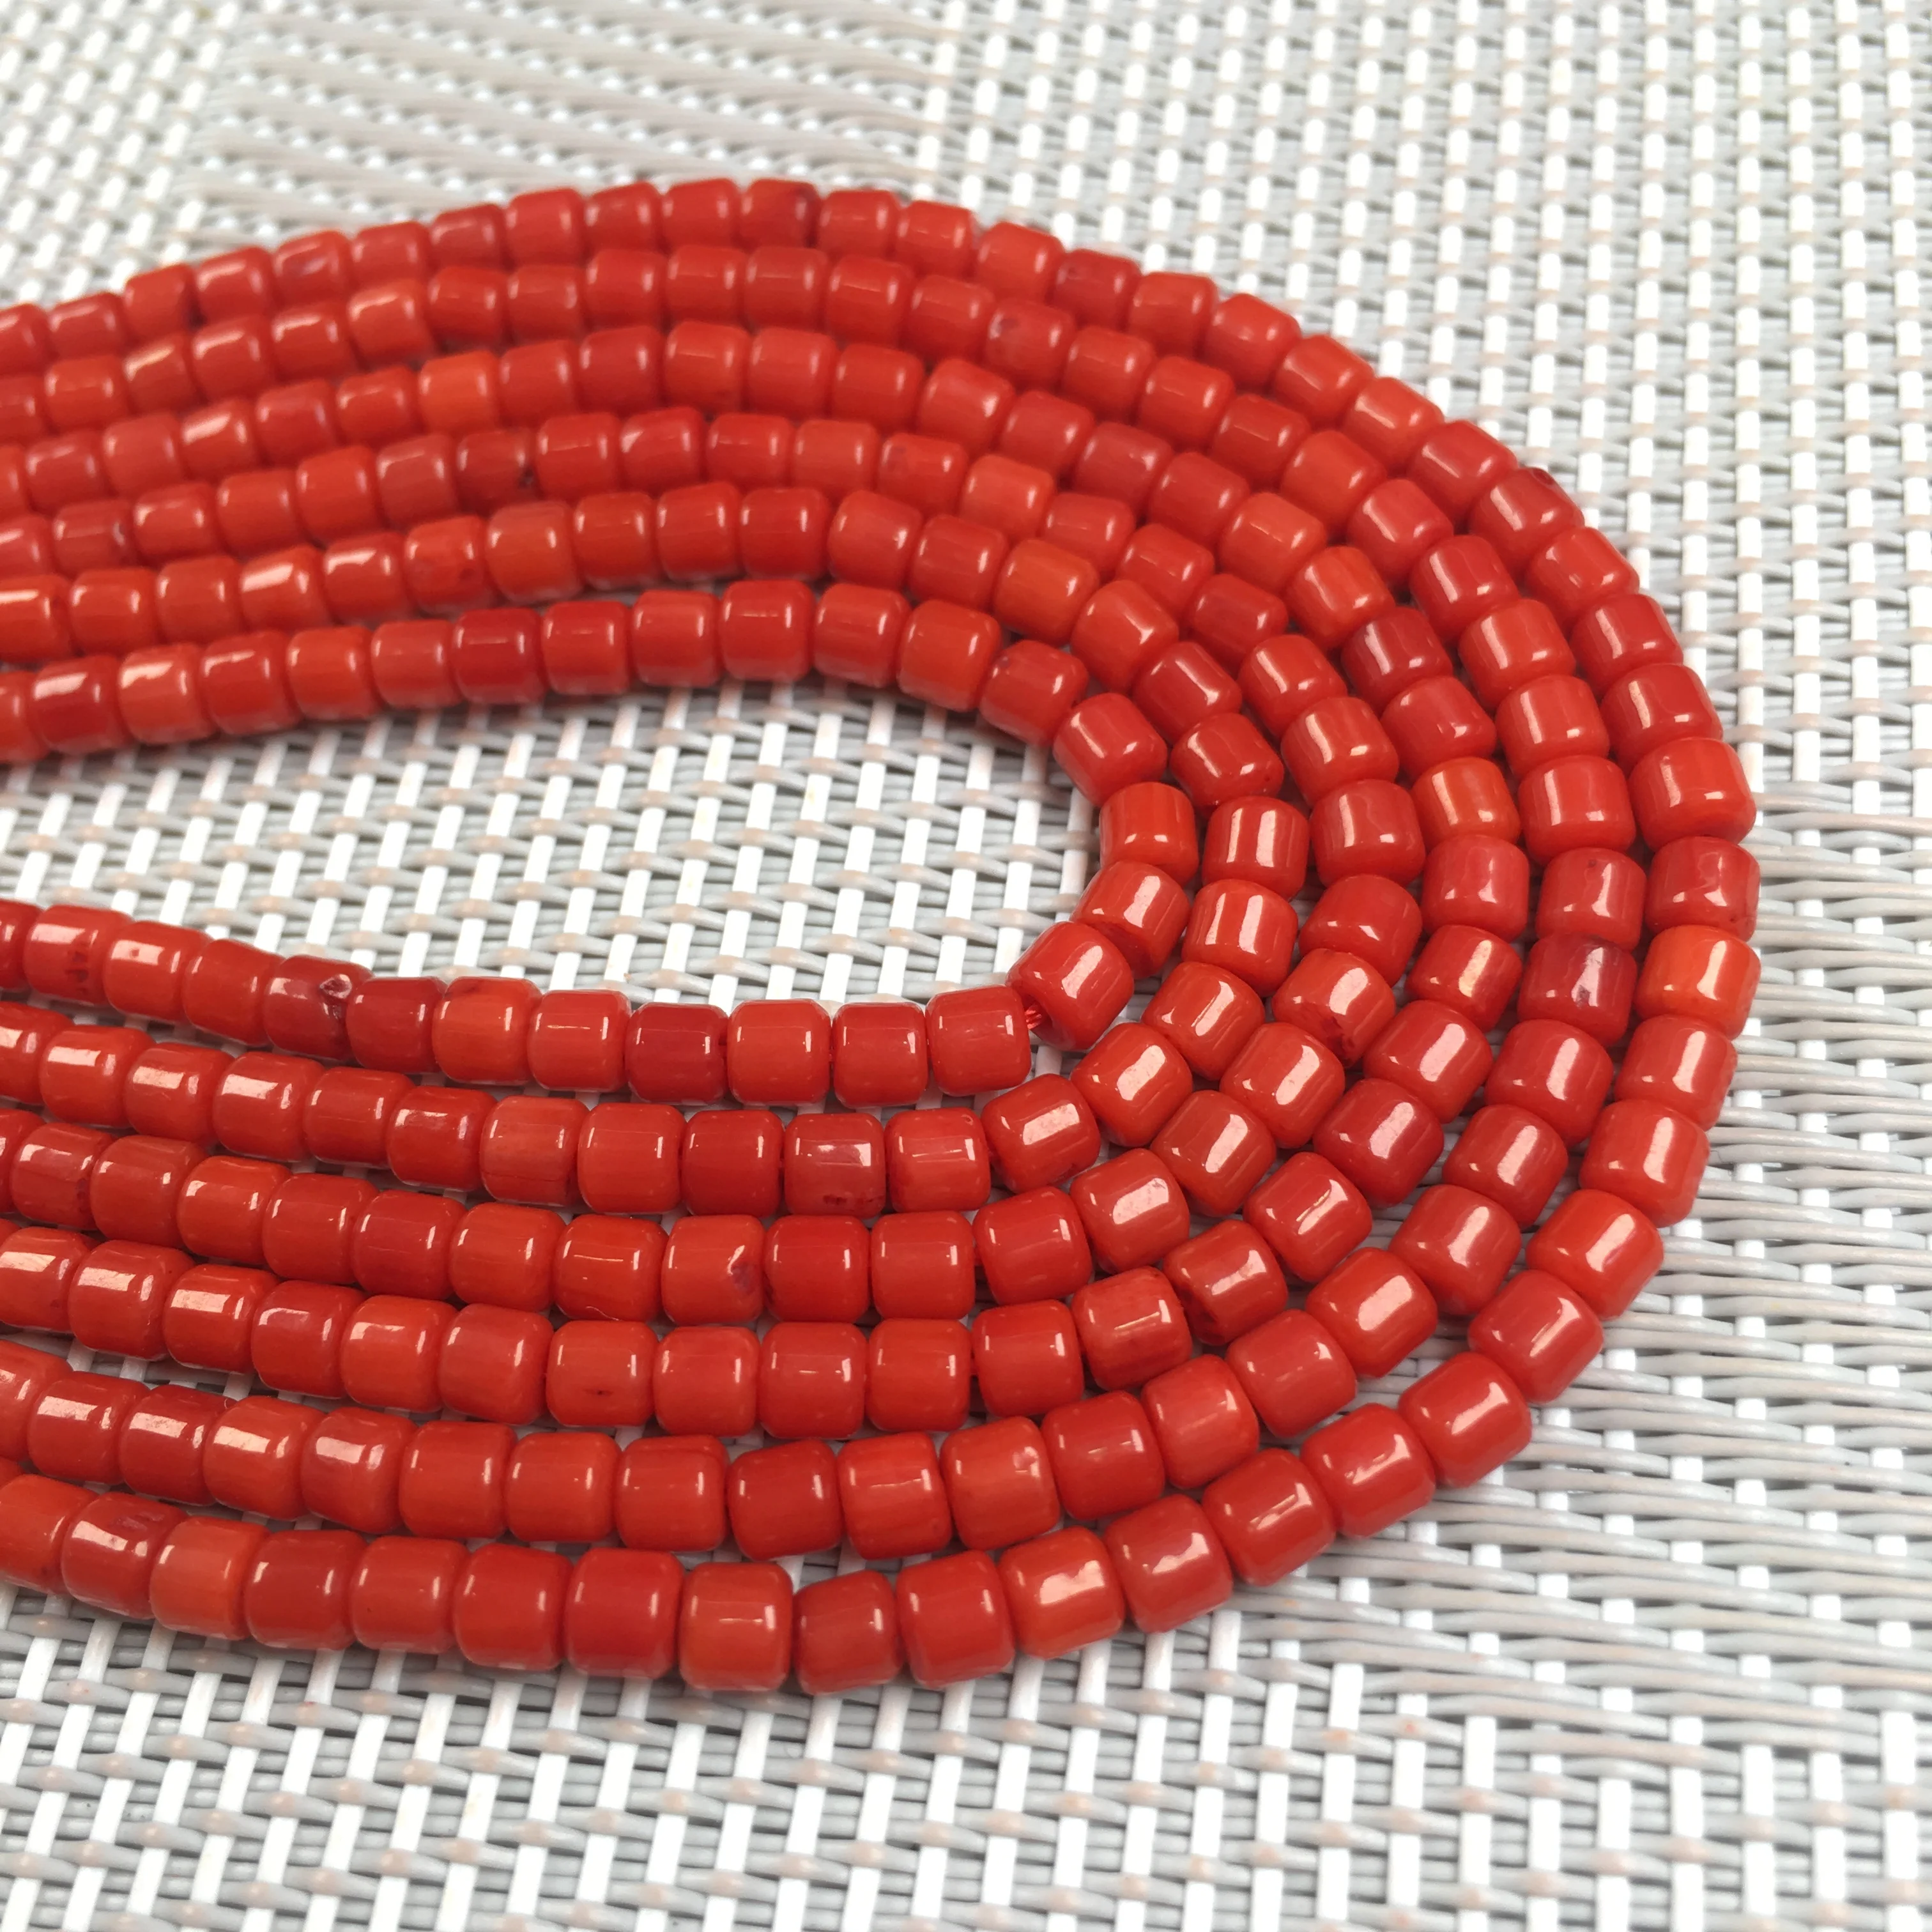 

Red Cylindrical Coral Beads Loose Spacing Beaded Necklace Earrings Bracelet Accessories Charming Jewelry Gifts for Women and Men